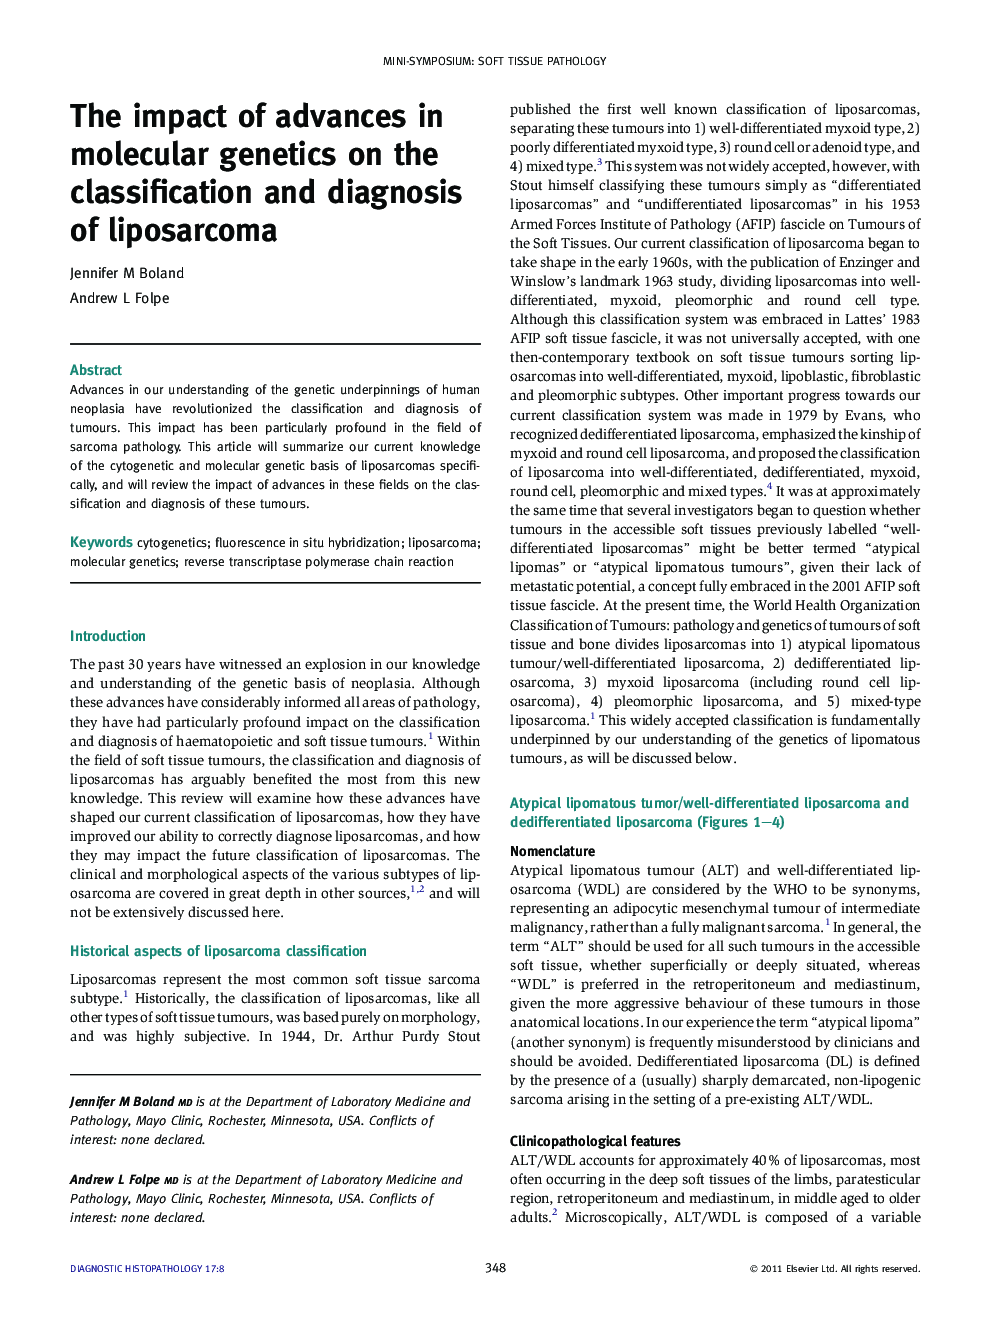 The impact of advances in molecular genetics on the classification and diagnosis of liposarcoma